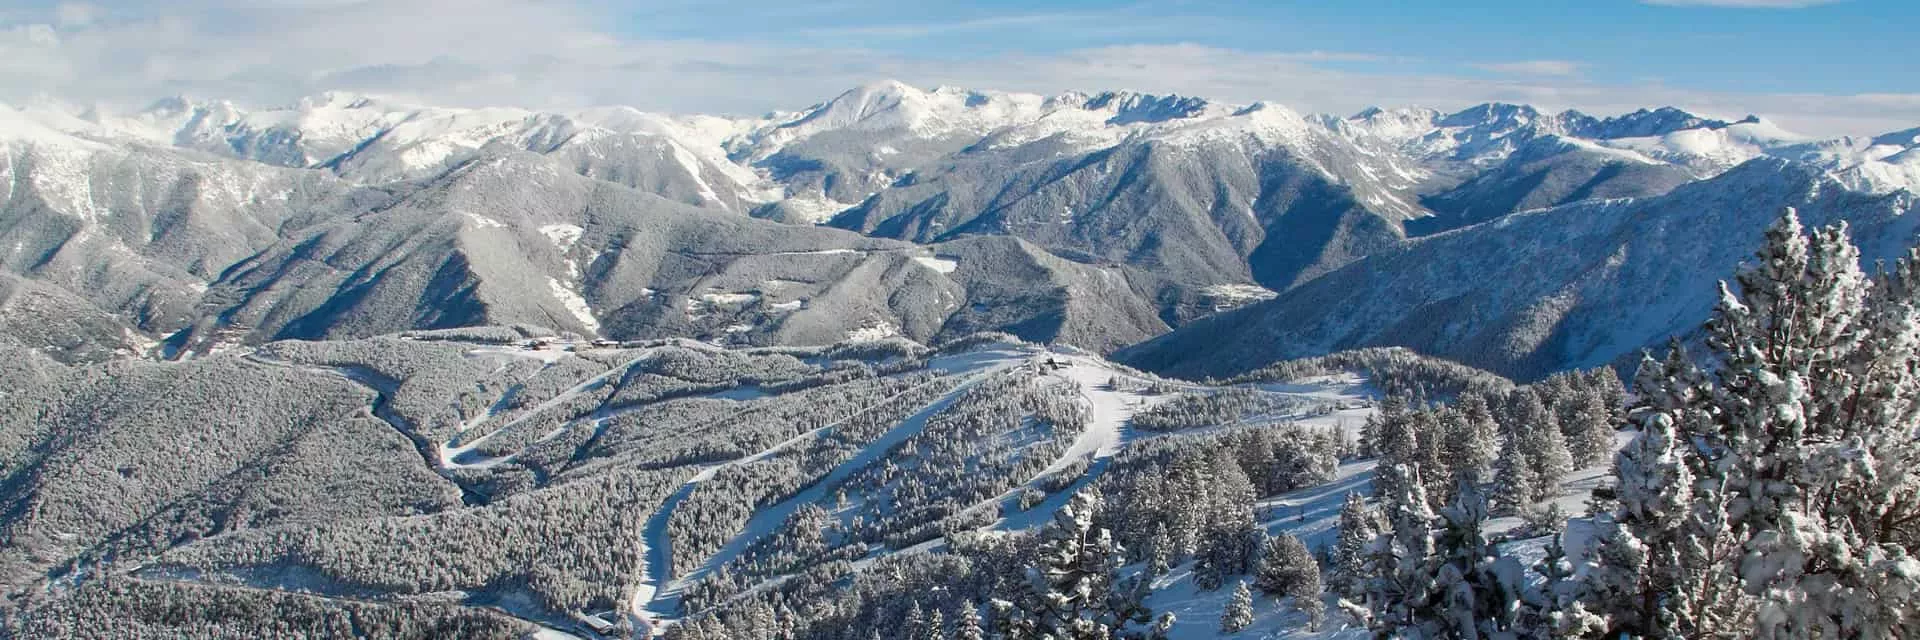 Holiday rental in the Pyrénées - Winter